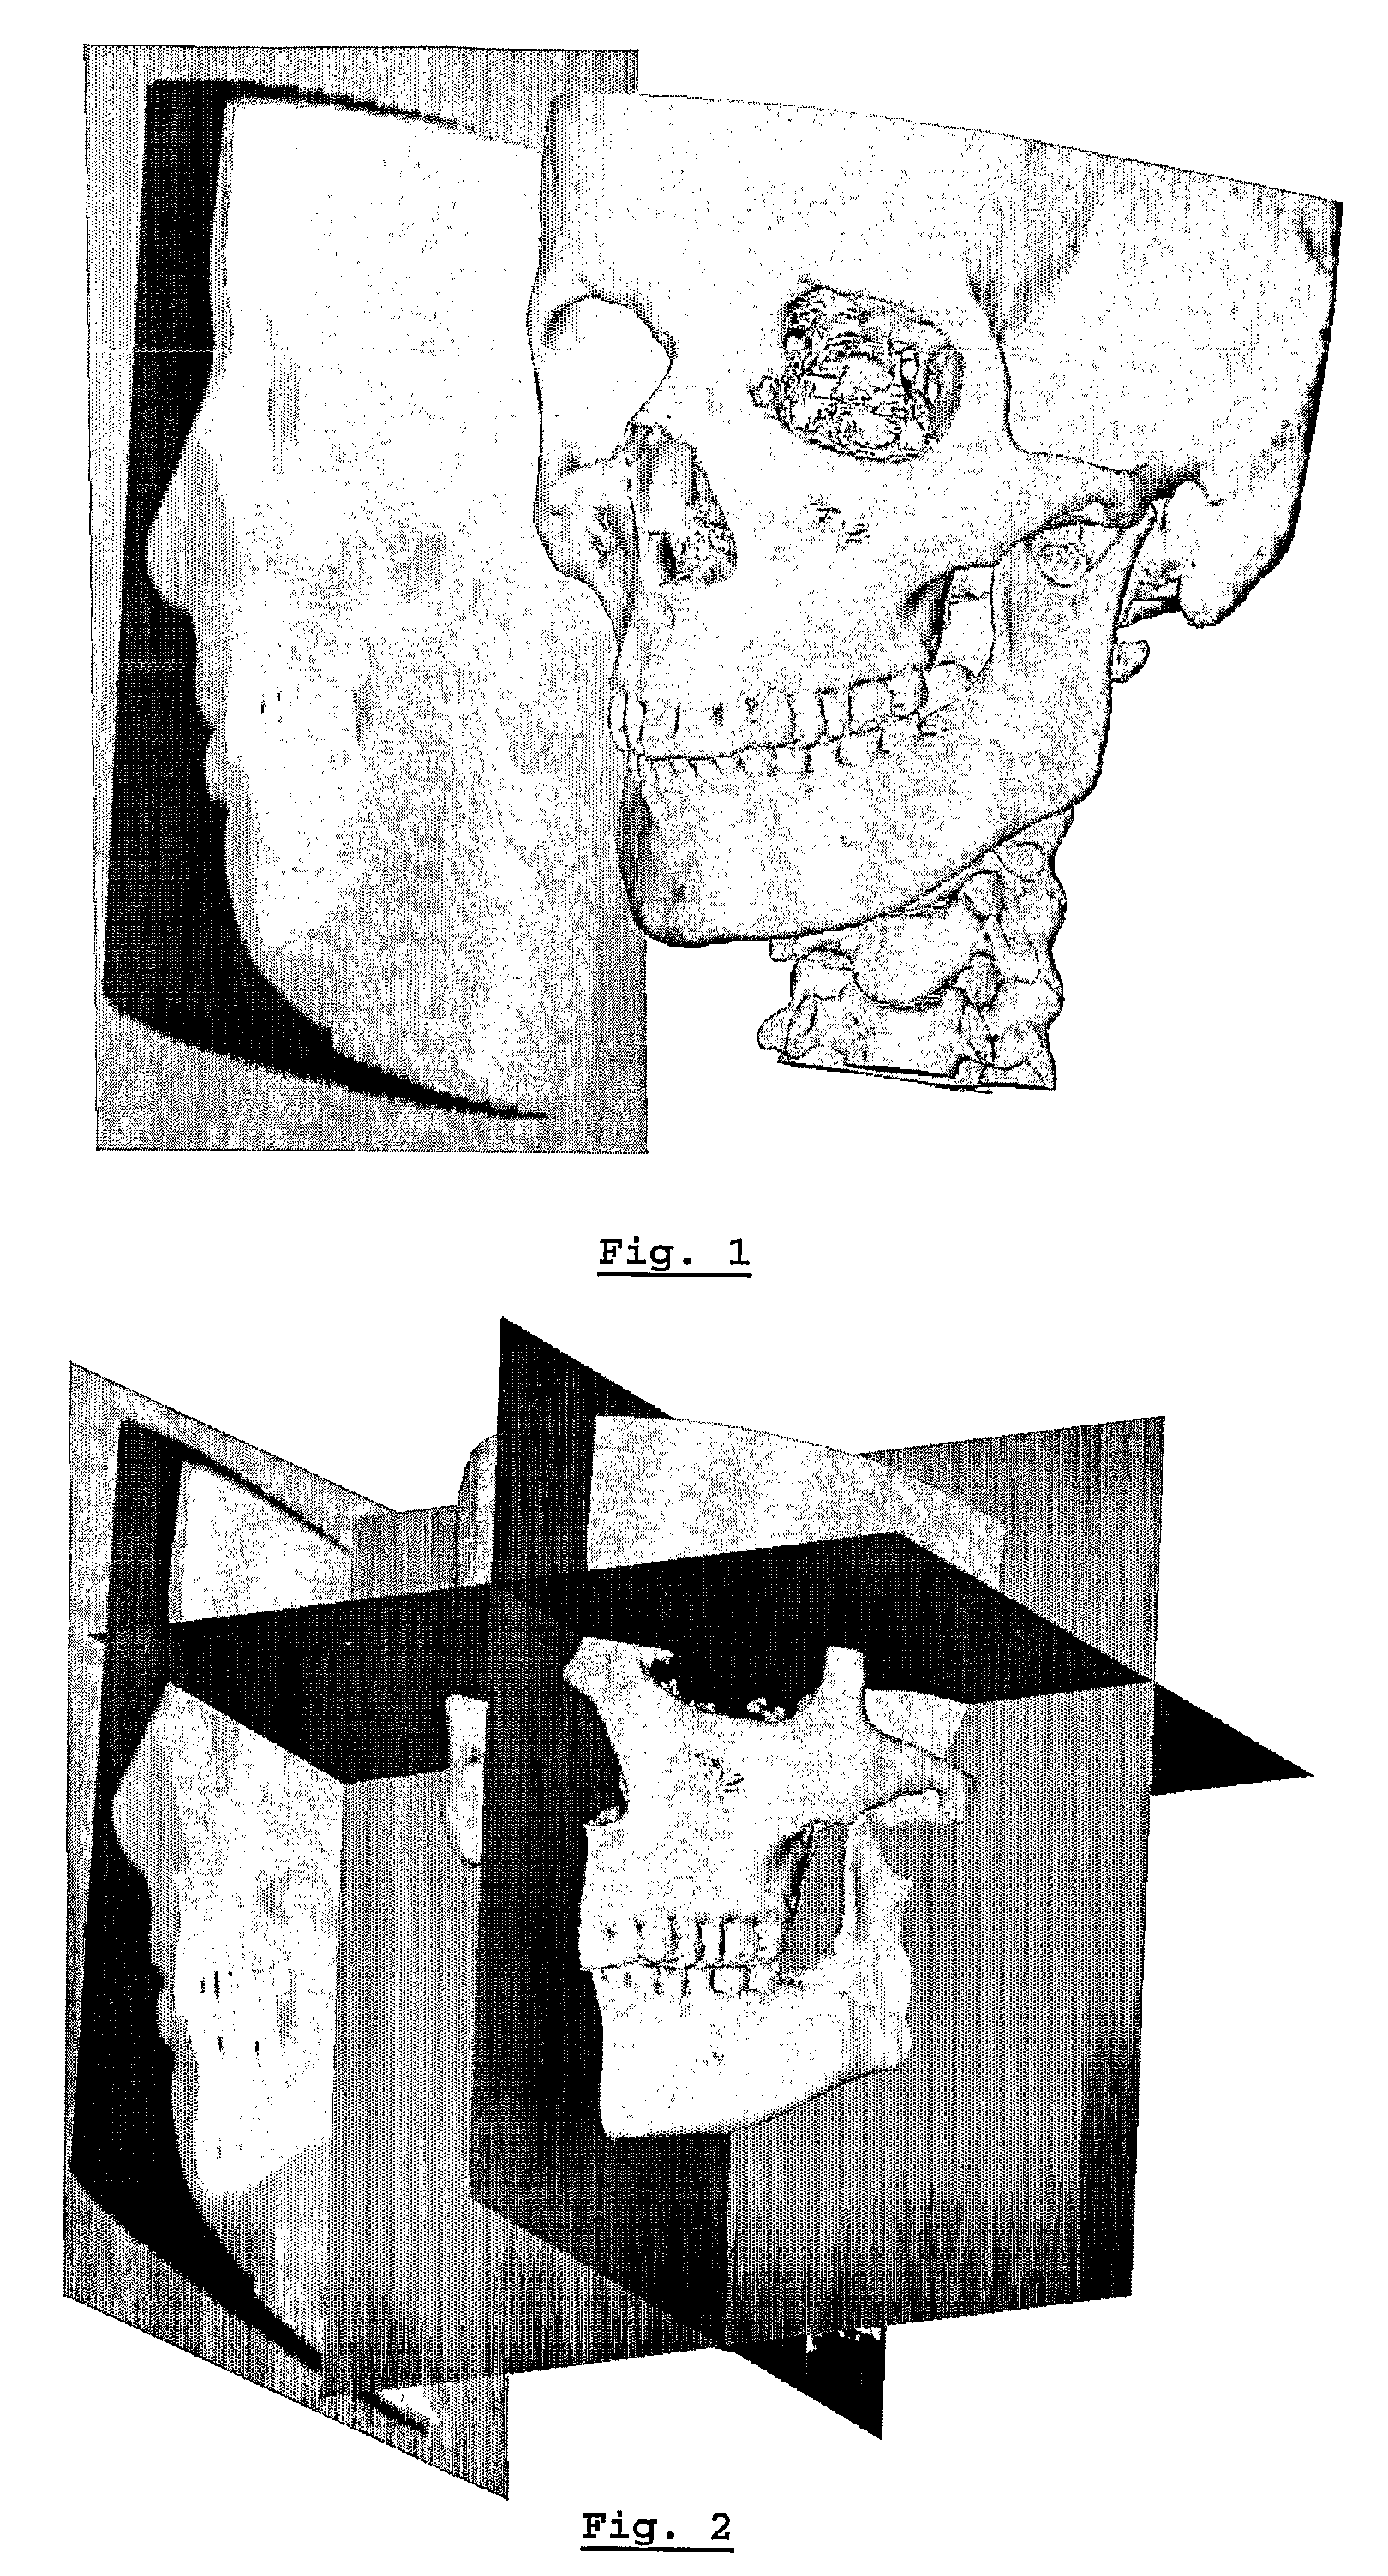 Method for deriving a treatment plan for orthognatic surgery and devices therefor